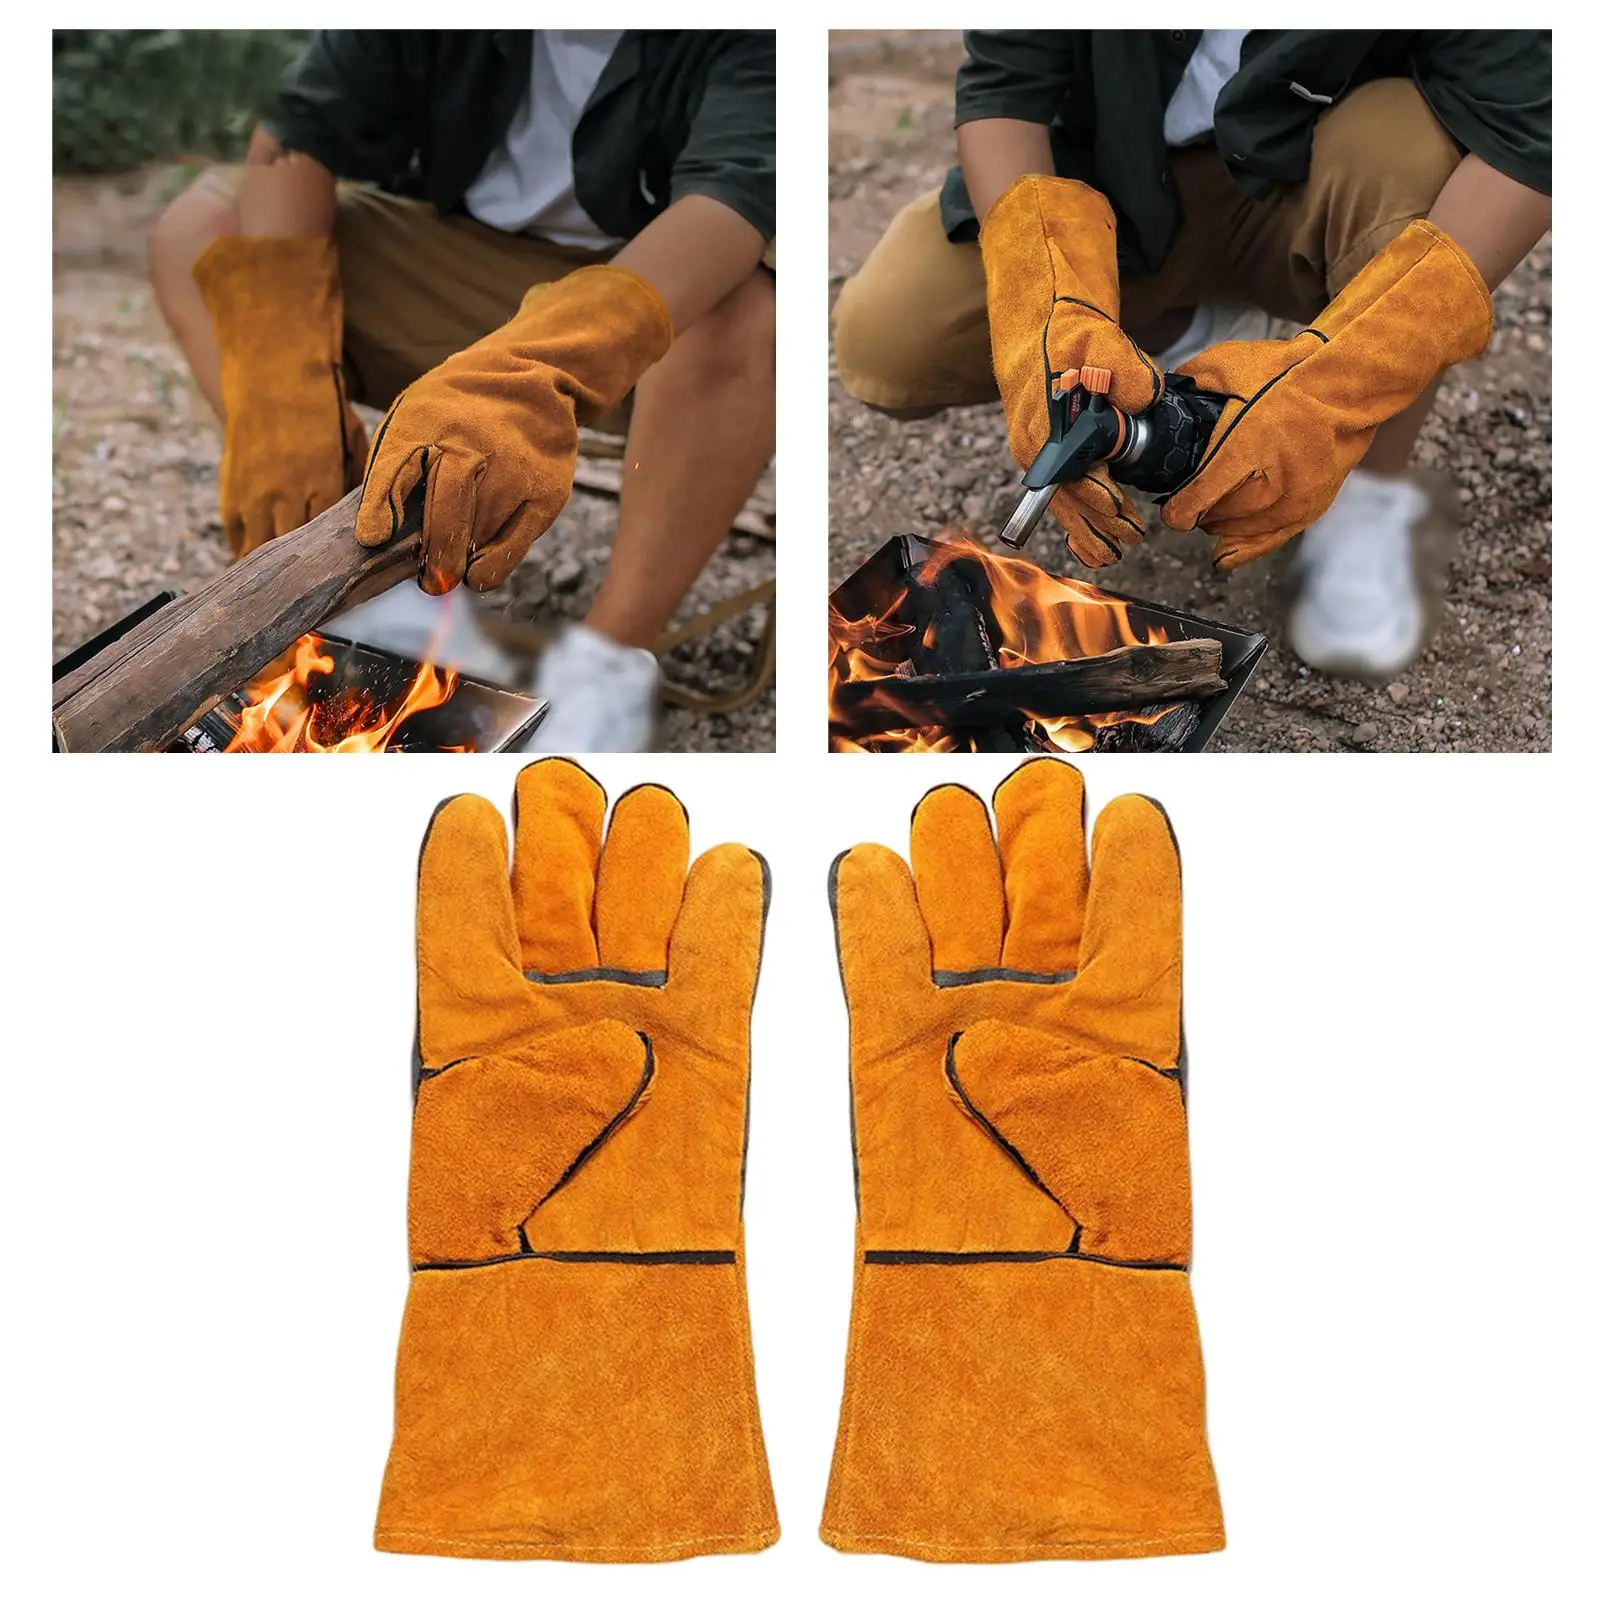 2 Pieces Insulation Heat Resistant Gloves Lengthen Pot Holder Kitchen Gloves Oven Mitts Gloves for Kitchen Cooking Grill